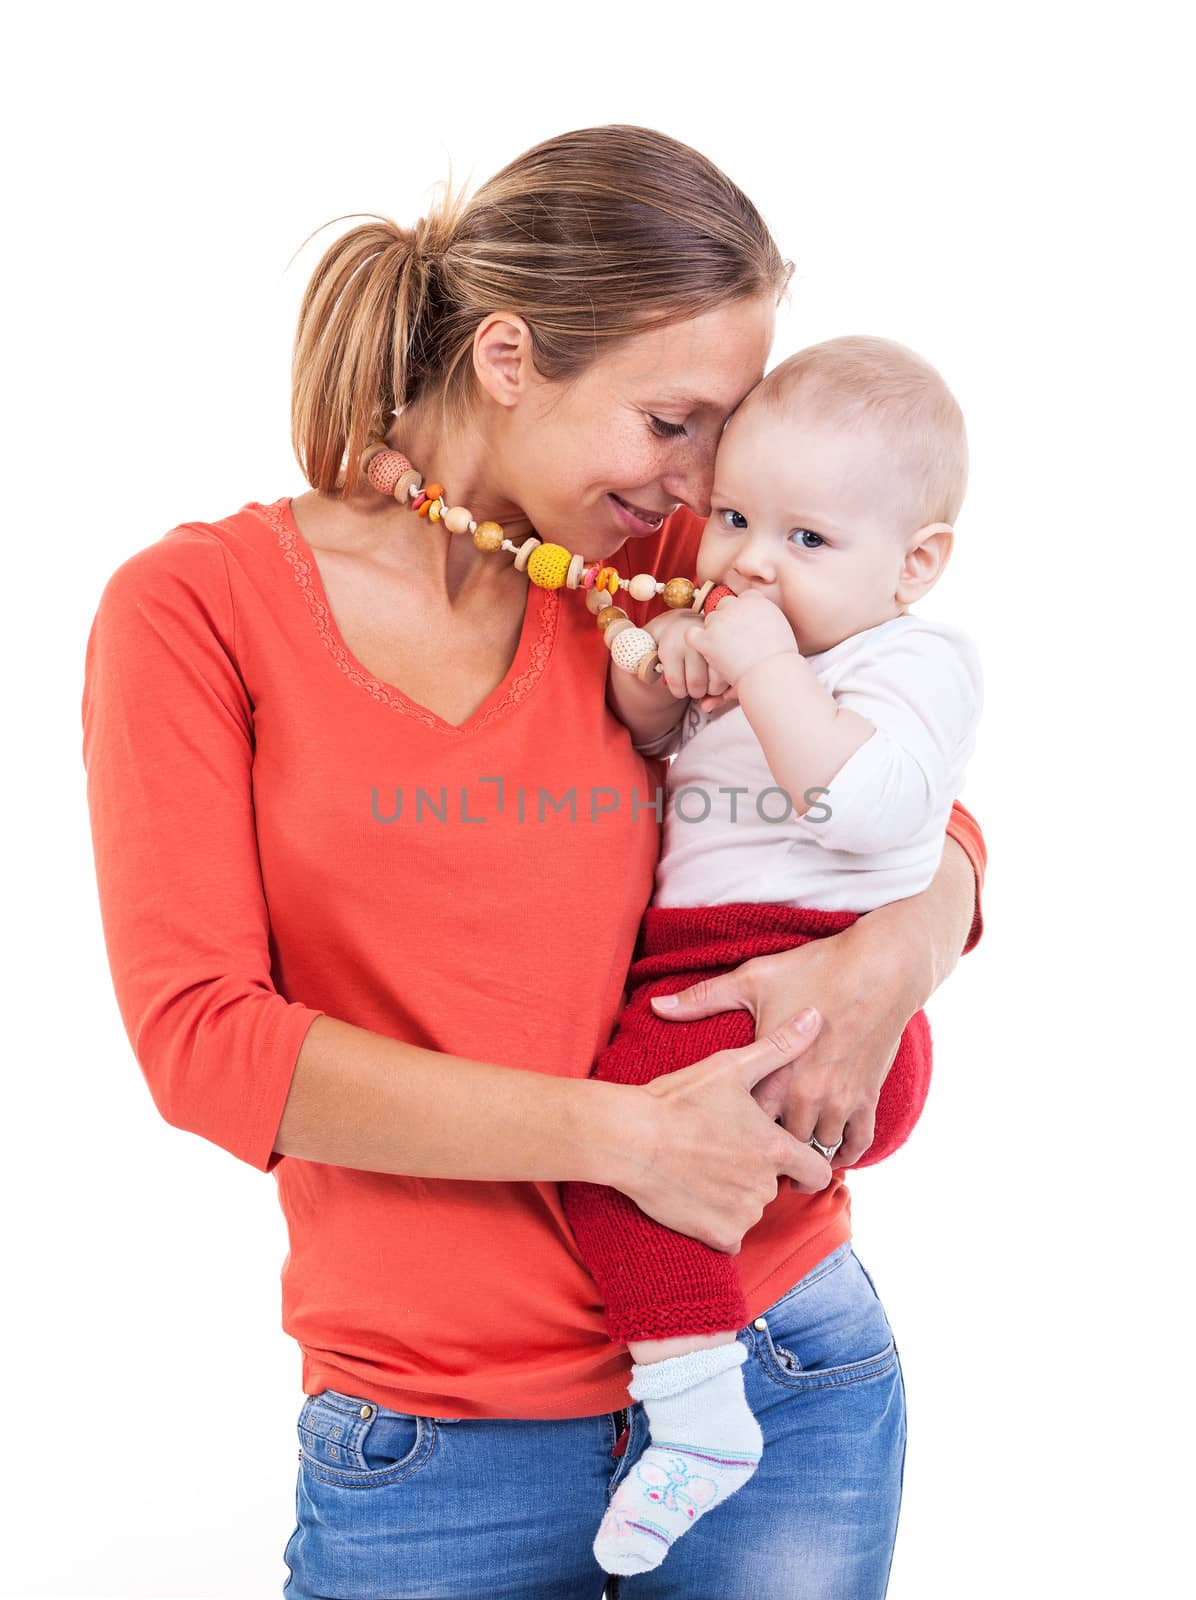 Young Caucasian woman and baby boy over white by photobac